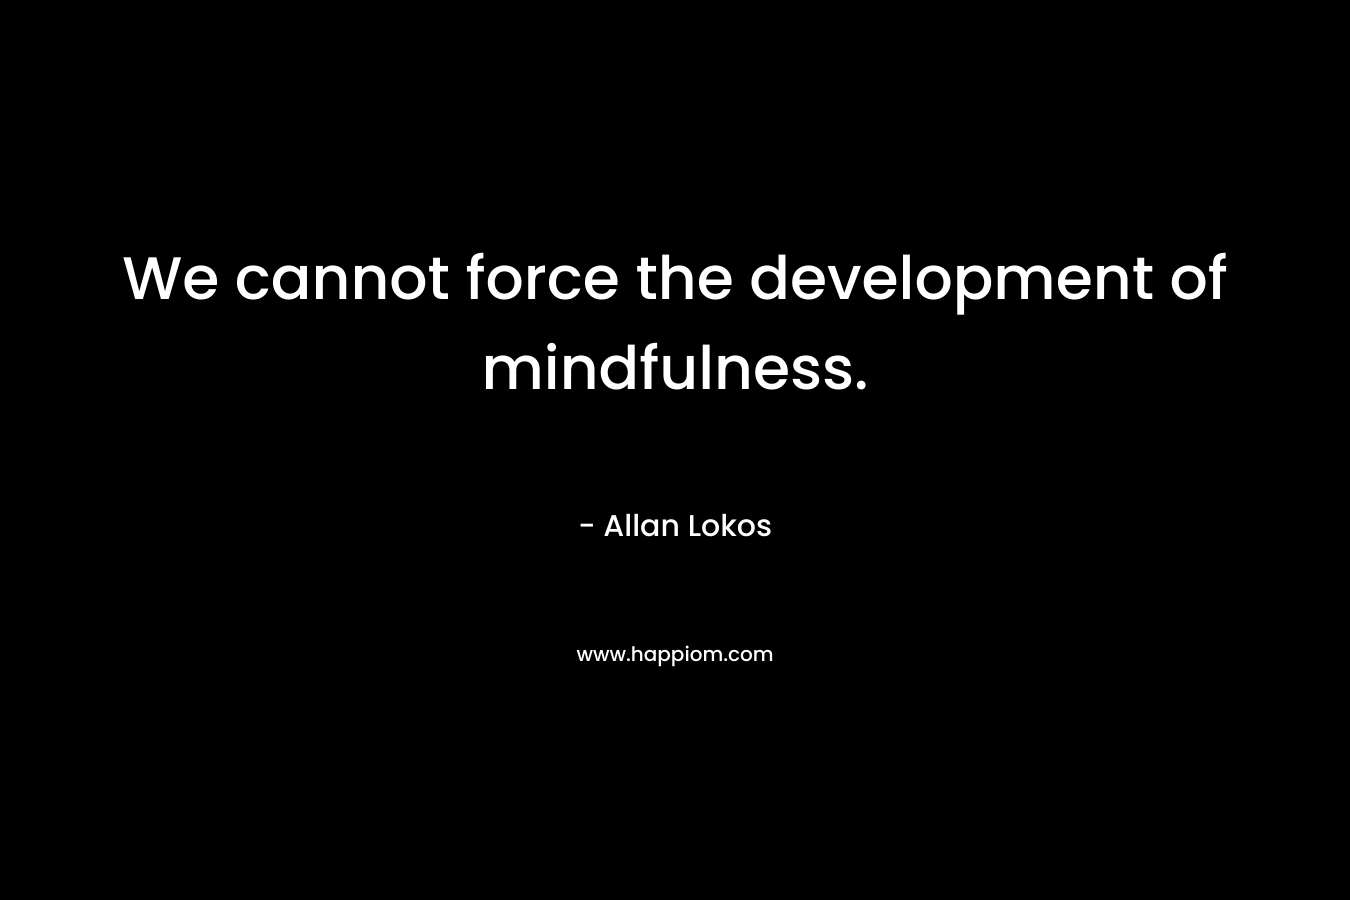 We cannot force the development of mindfulness.